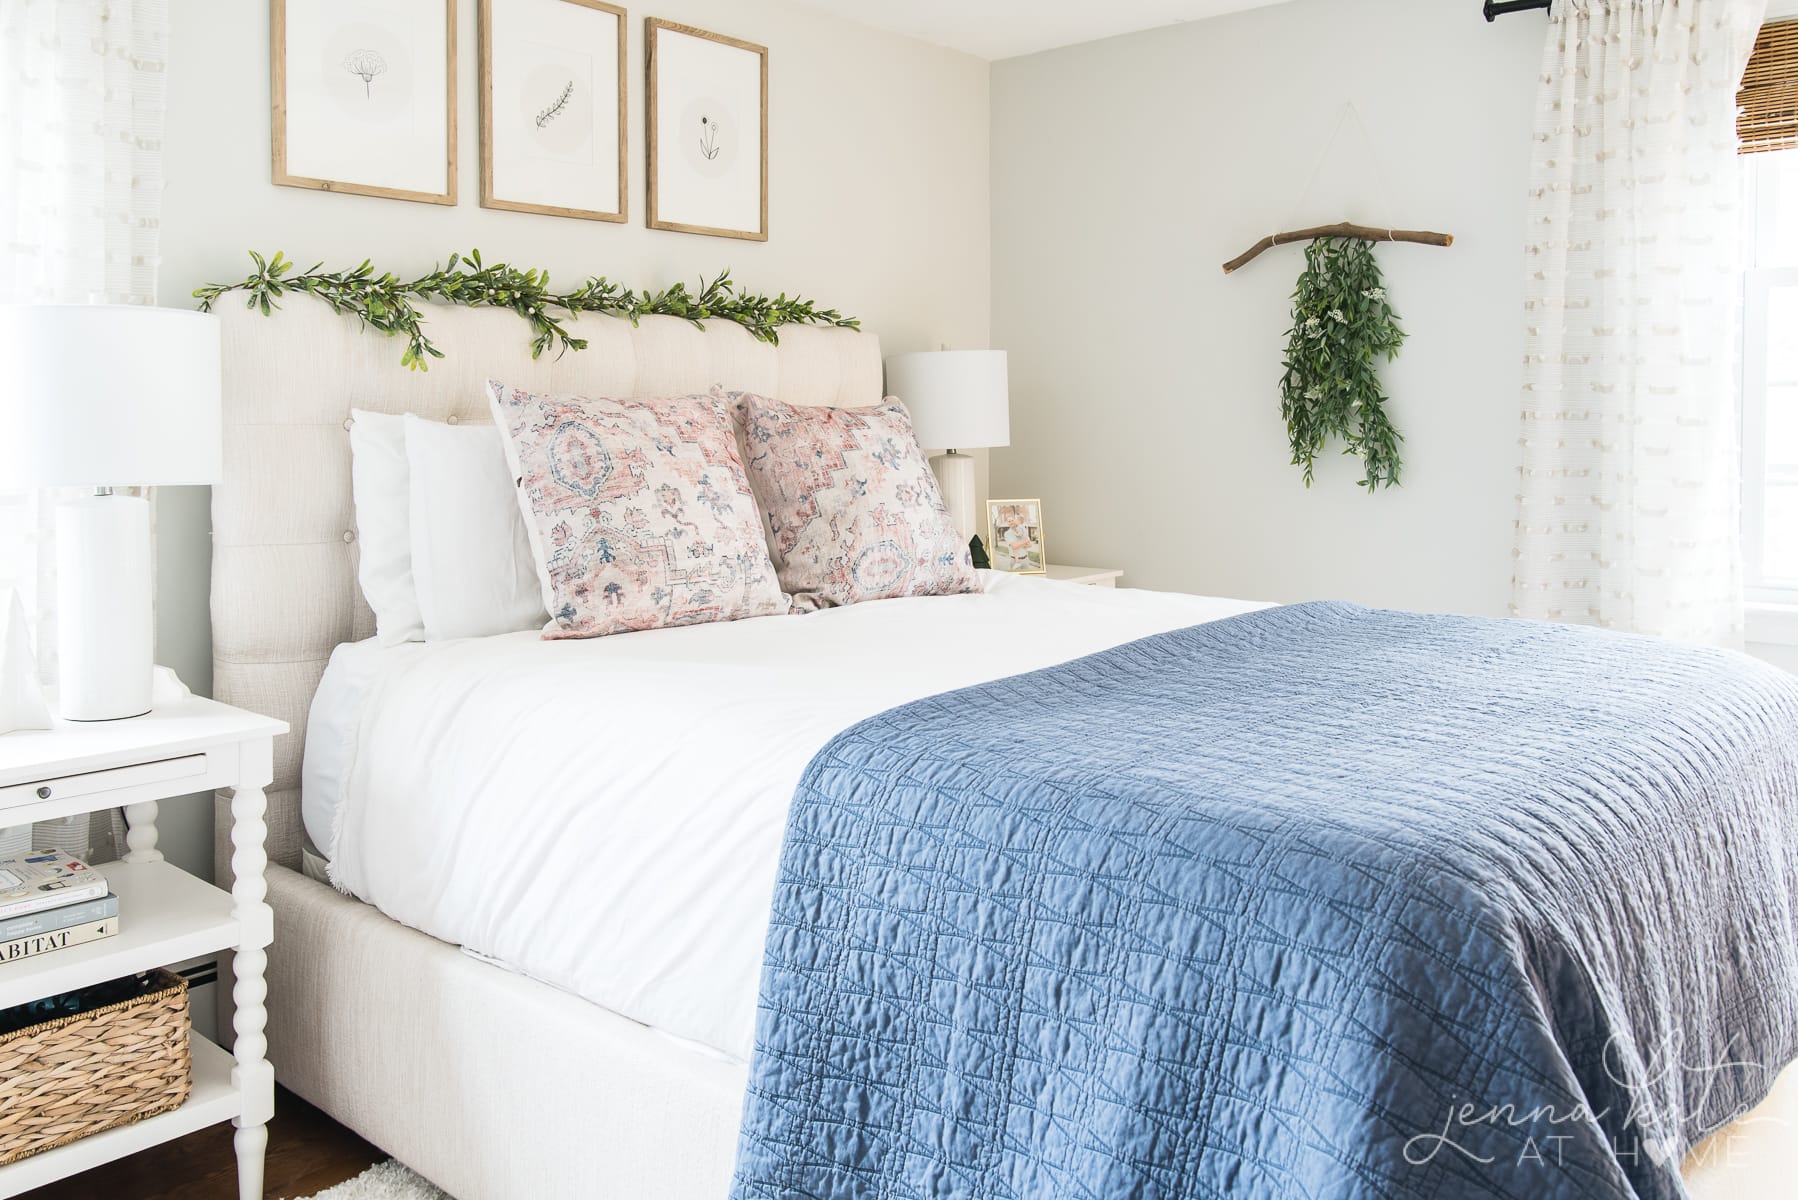 bed with Christmas garland draped over the headboard 